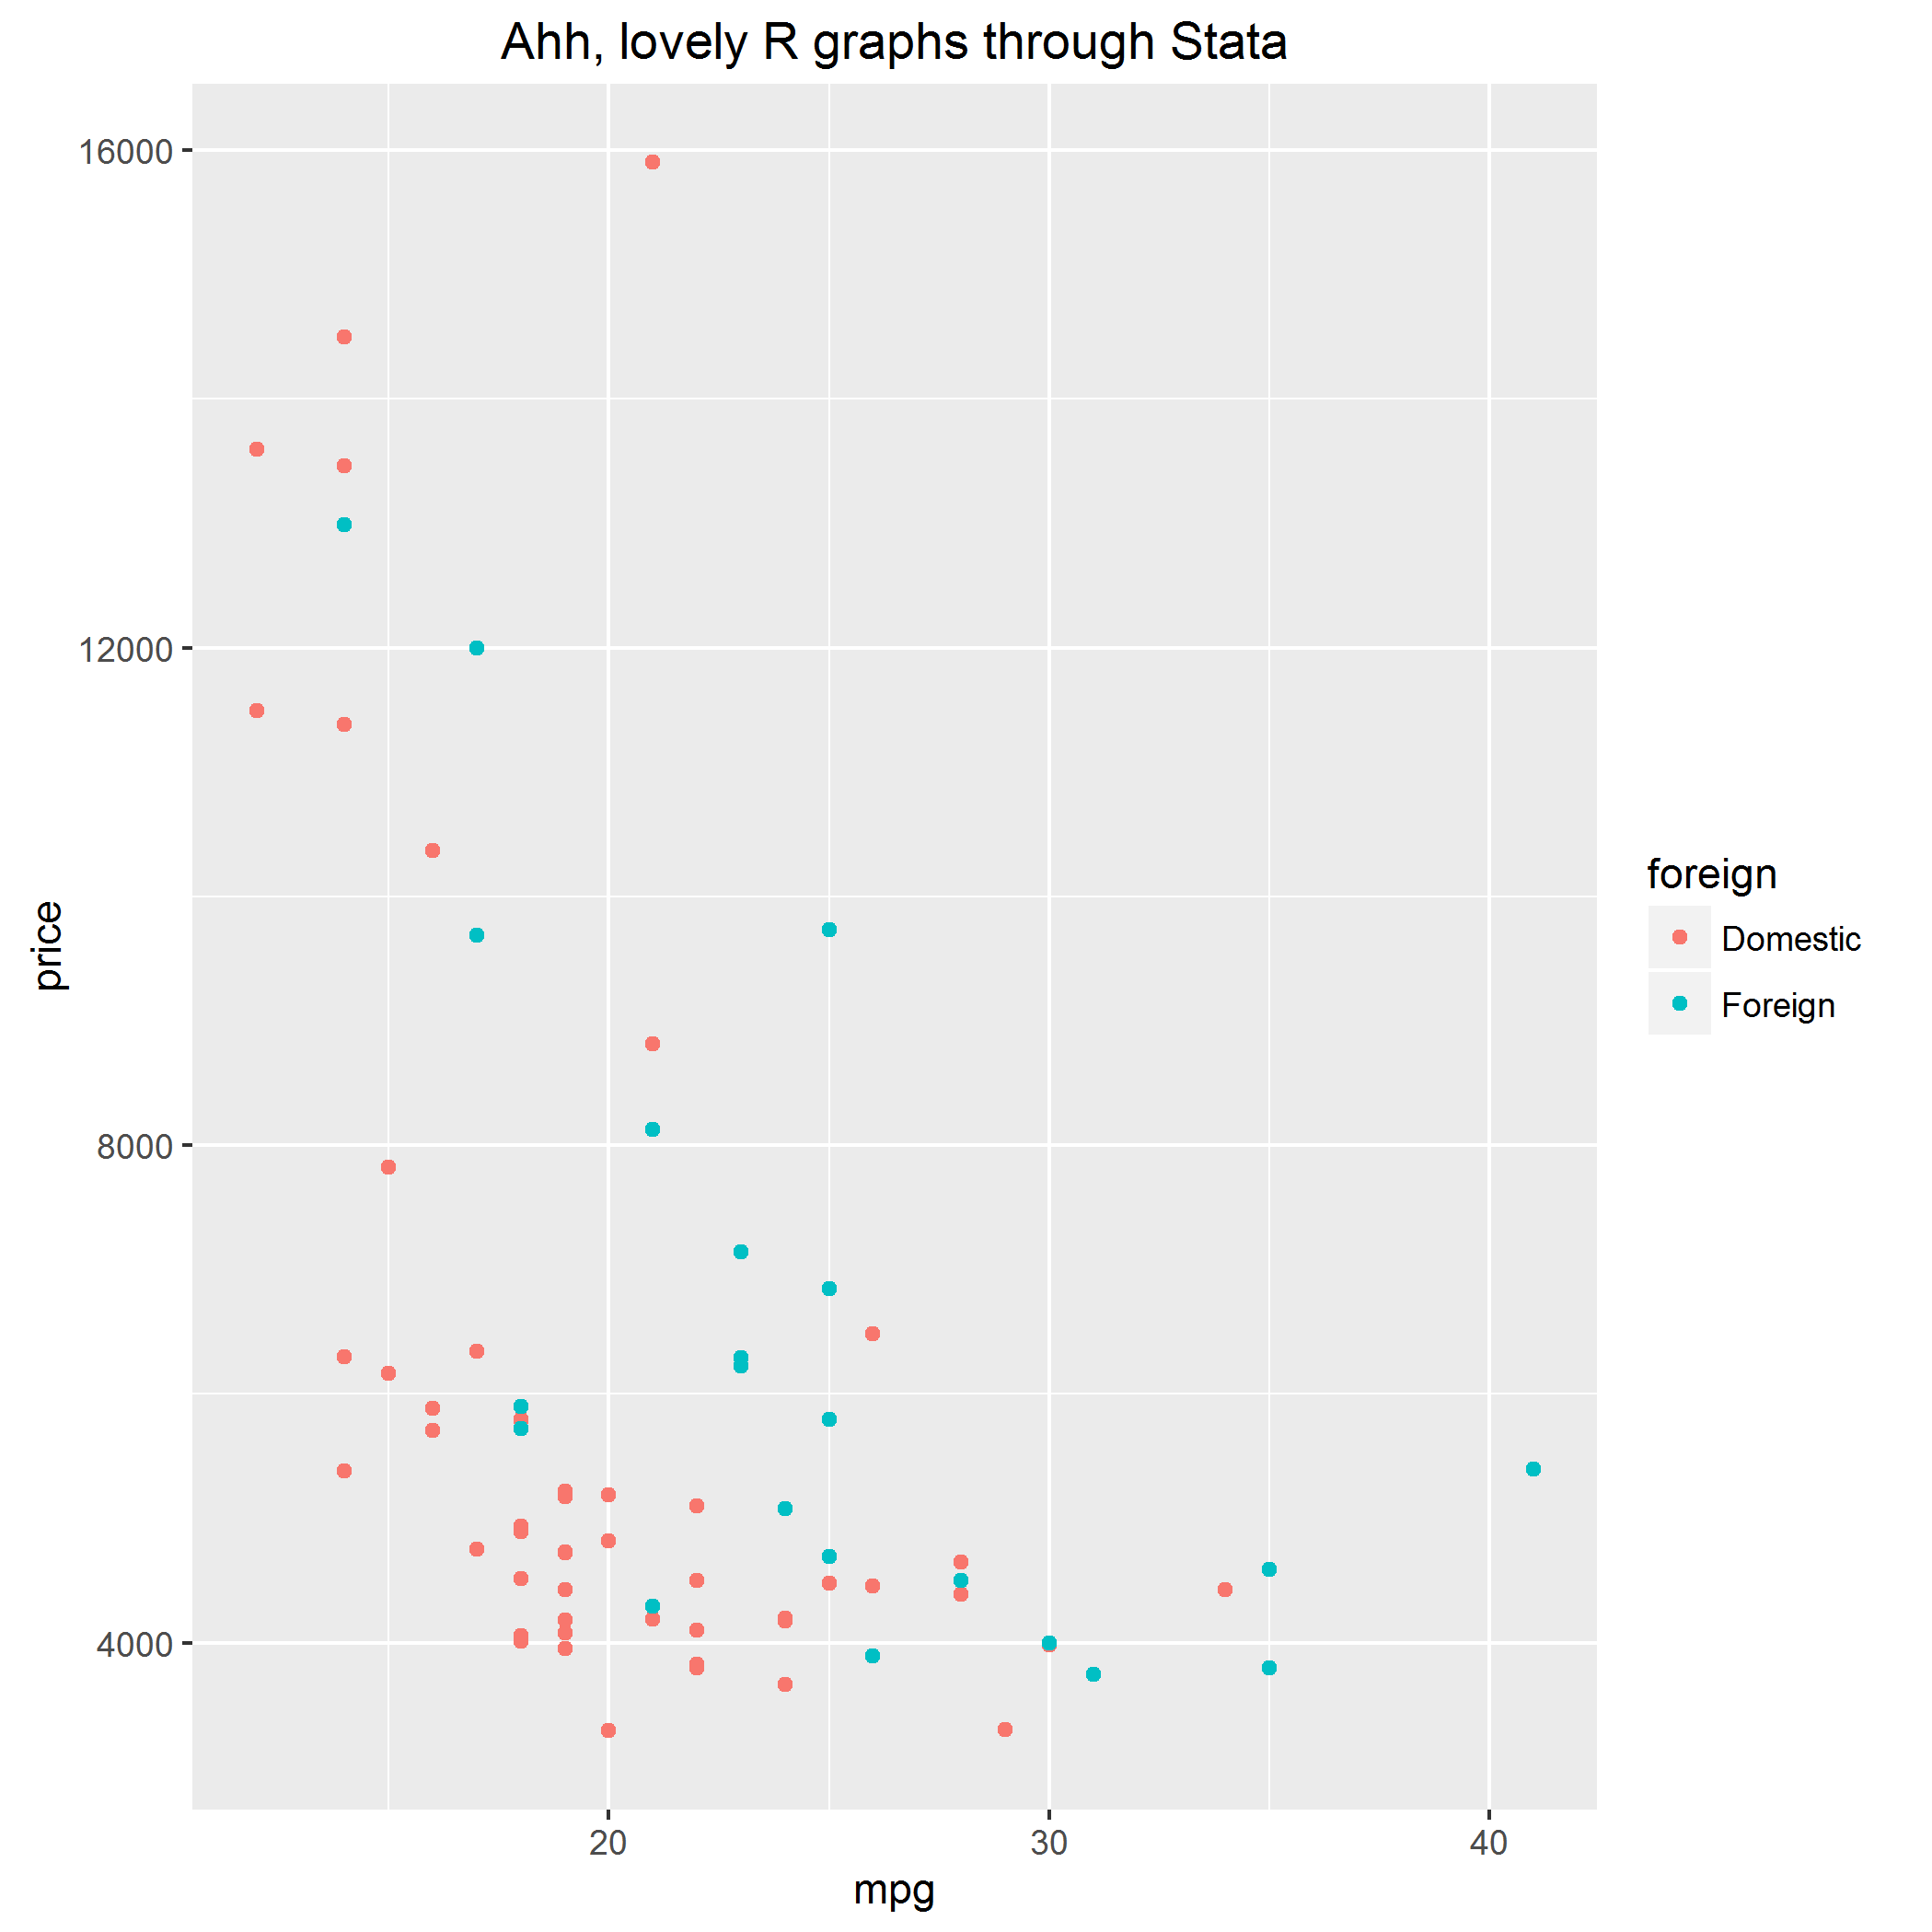 A simple ggplot produced directly from Stata